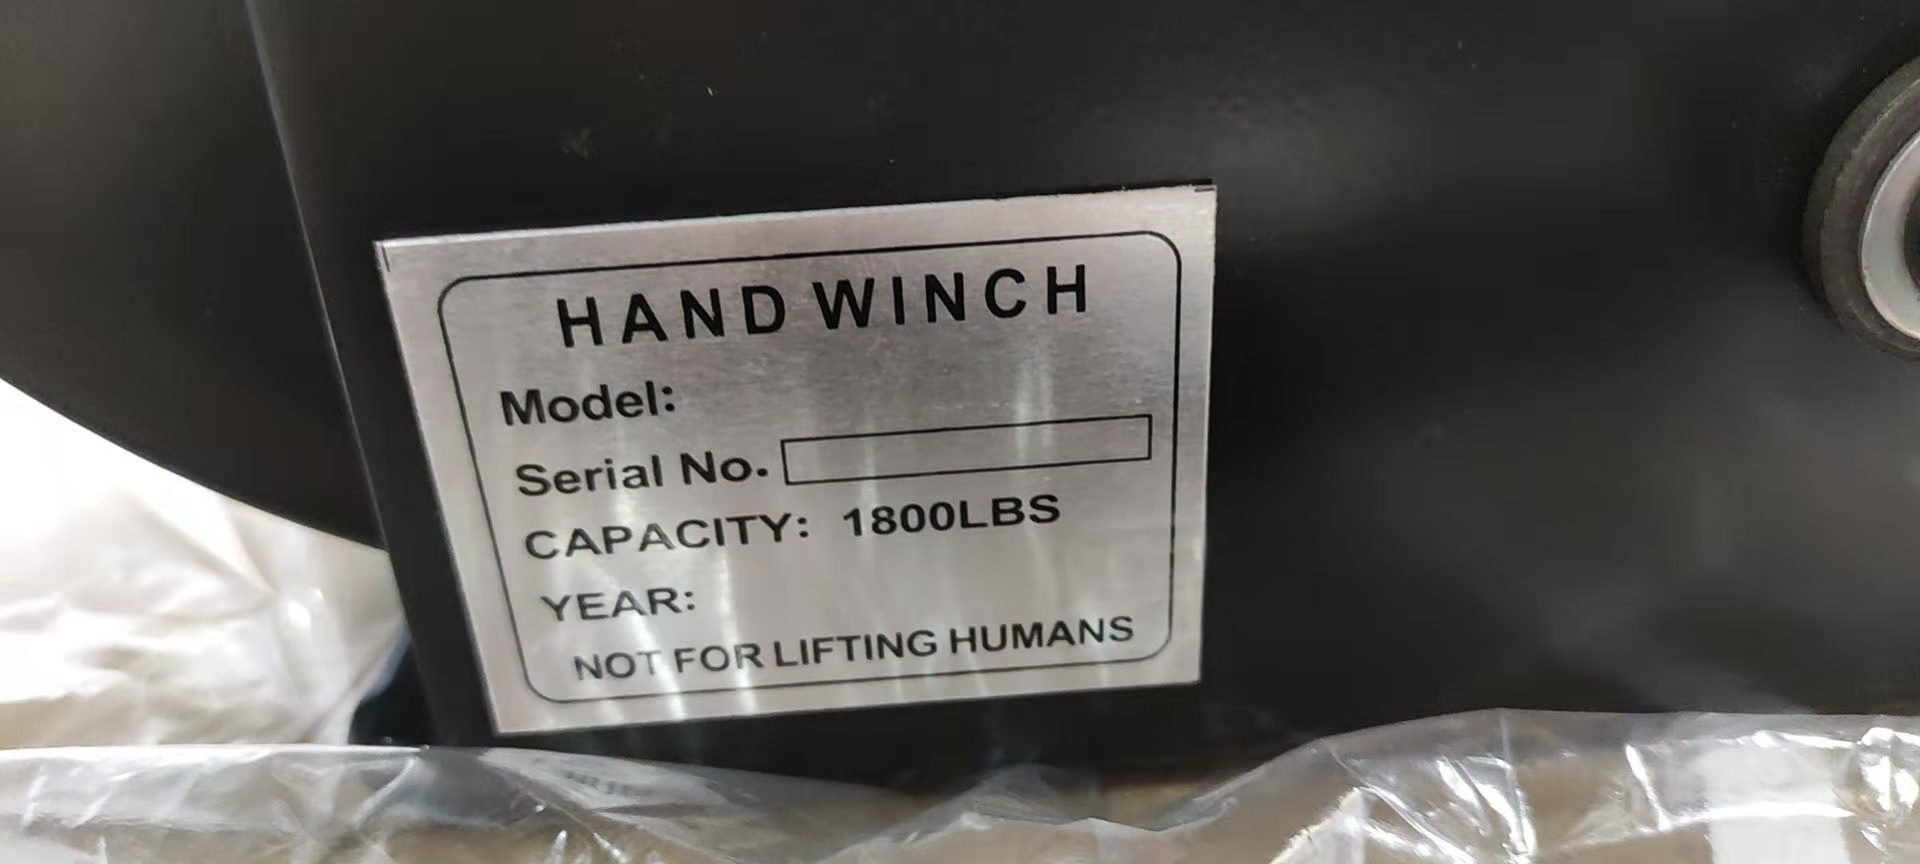 Two handle hand winch 1800LBS delivered to Spain3.jpg